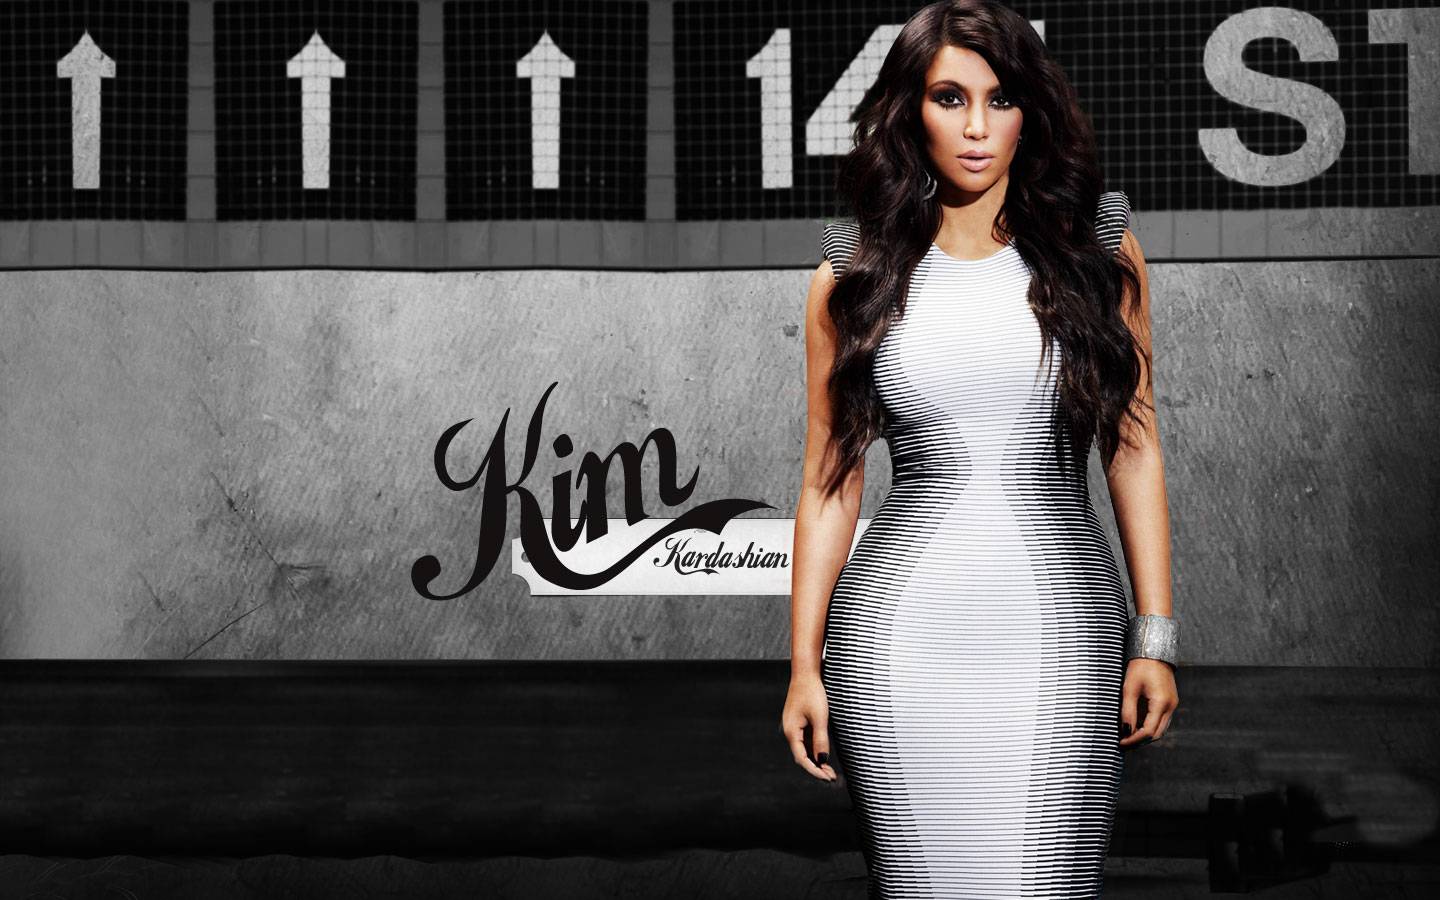 Kim K Name Background For Your Phone iPhone Android